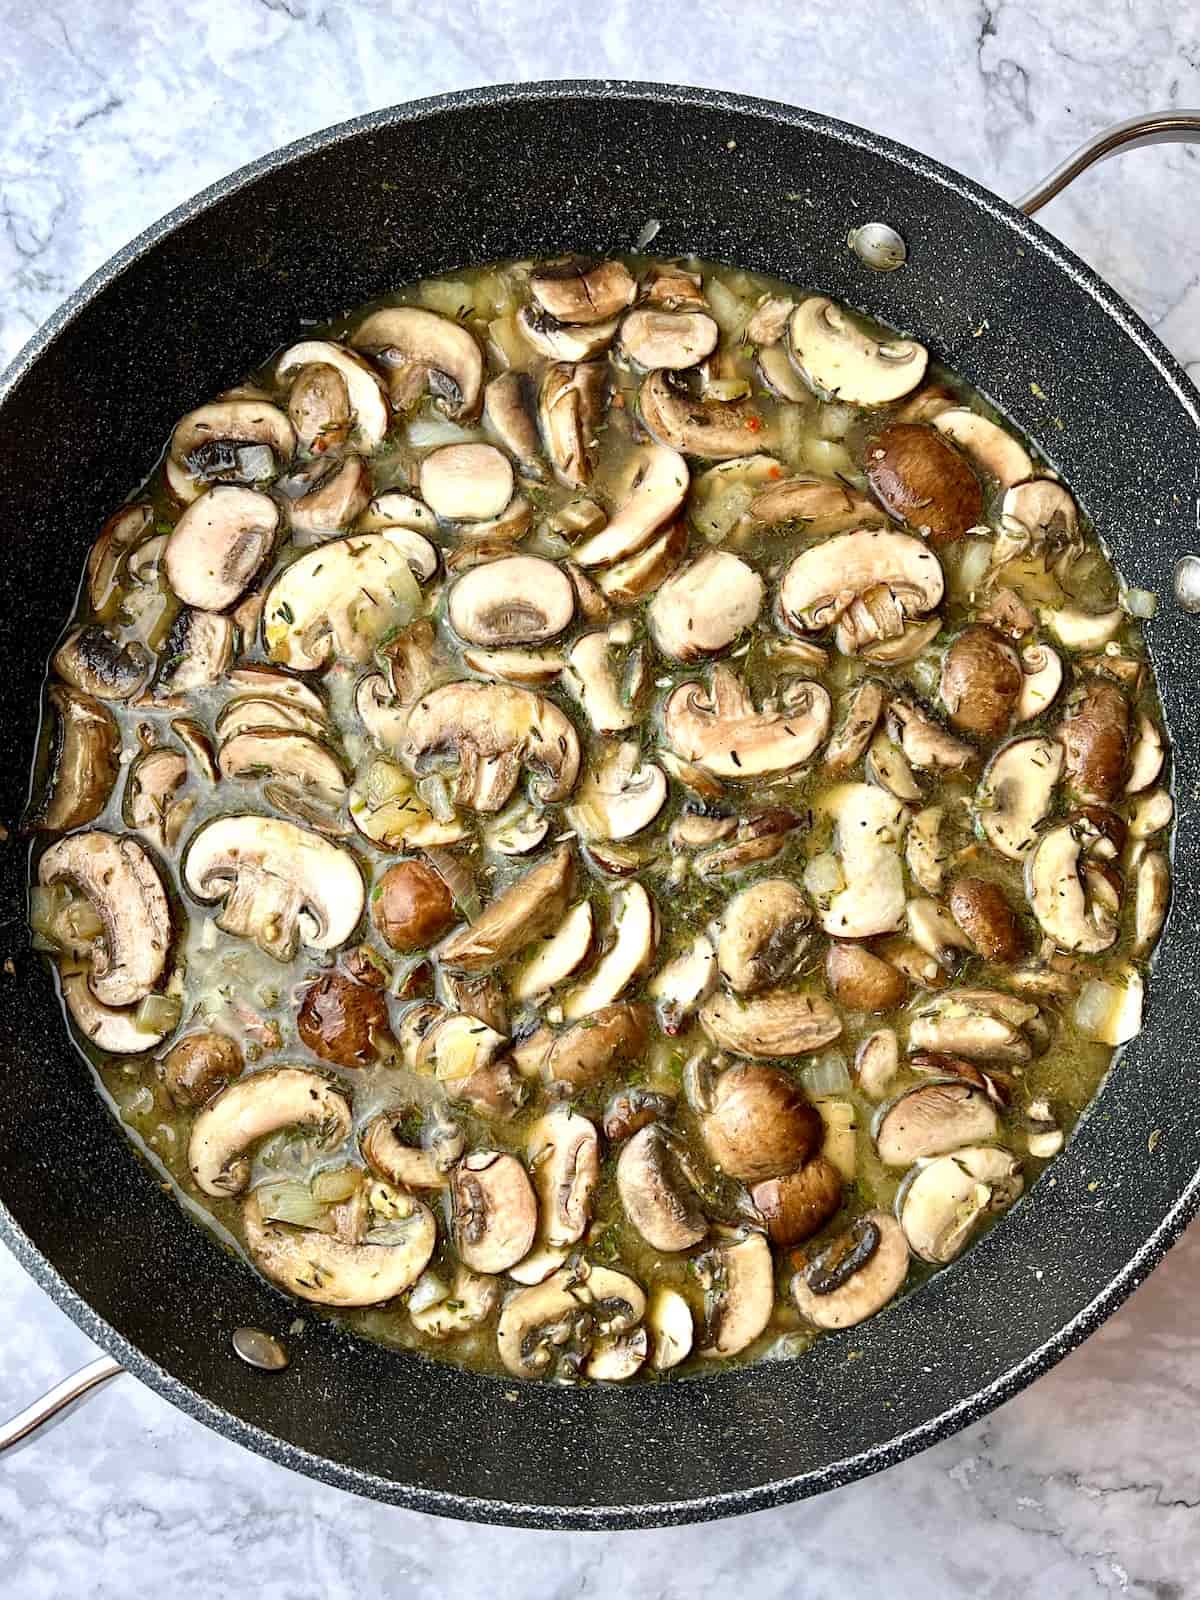 A large pan of mushrooms, onion, and vegetable broth.